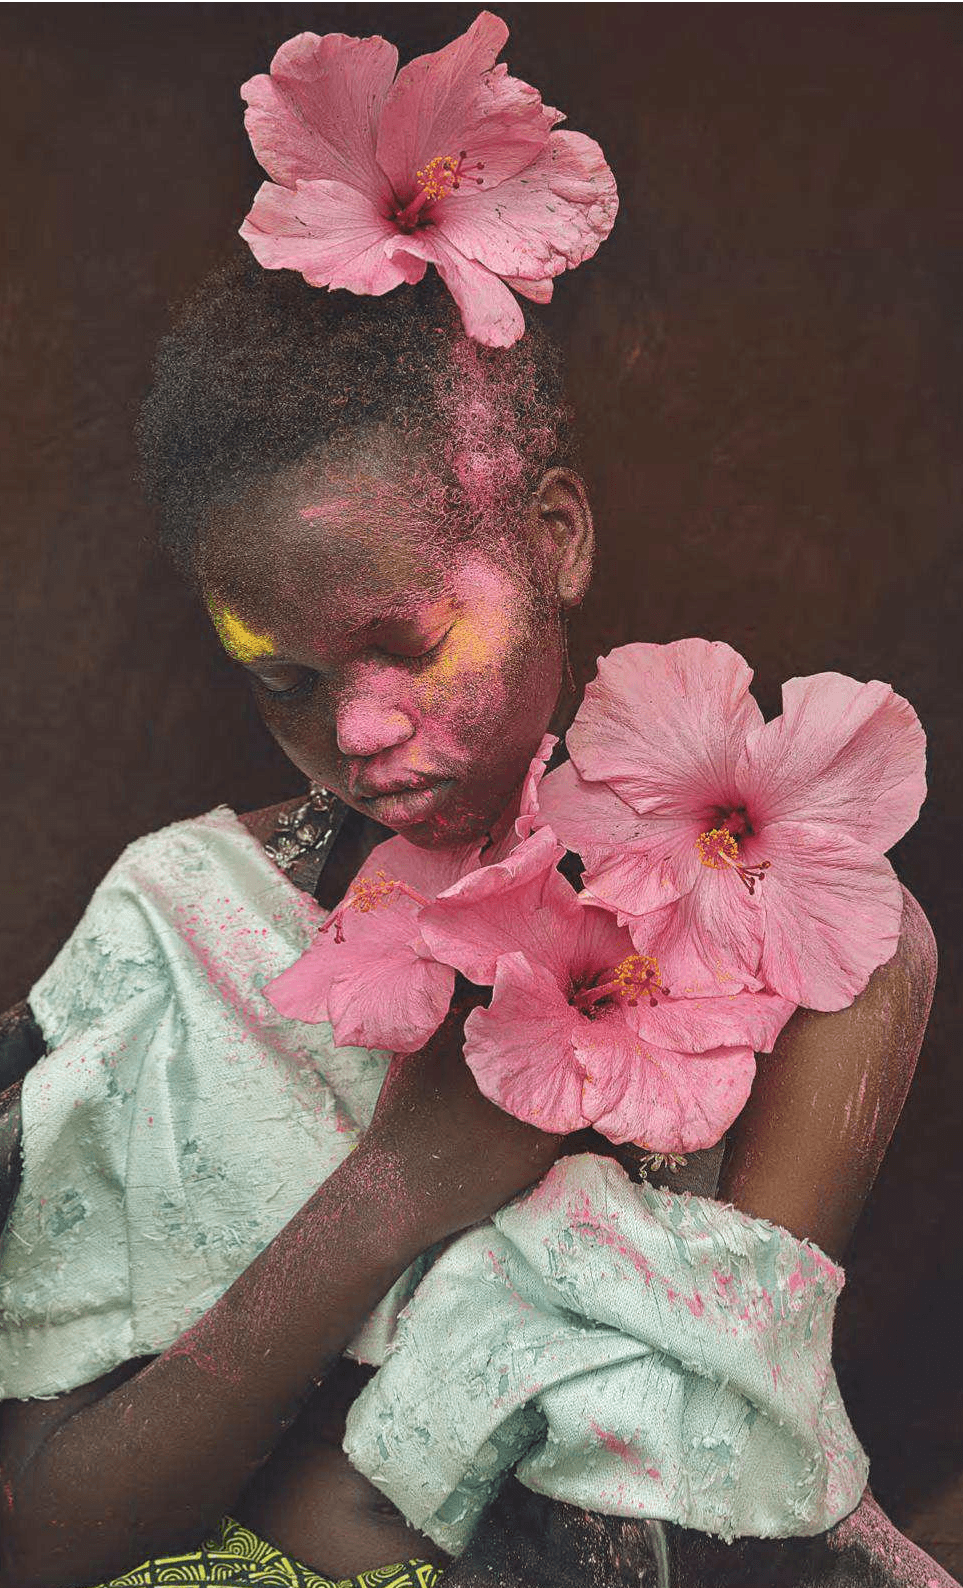 Jamaican Rhapsody' with Adut Akech by Tim Walker for Vogue UK, June